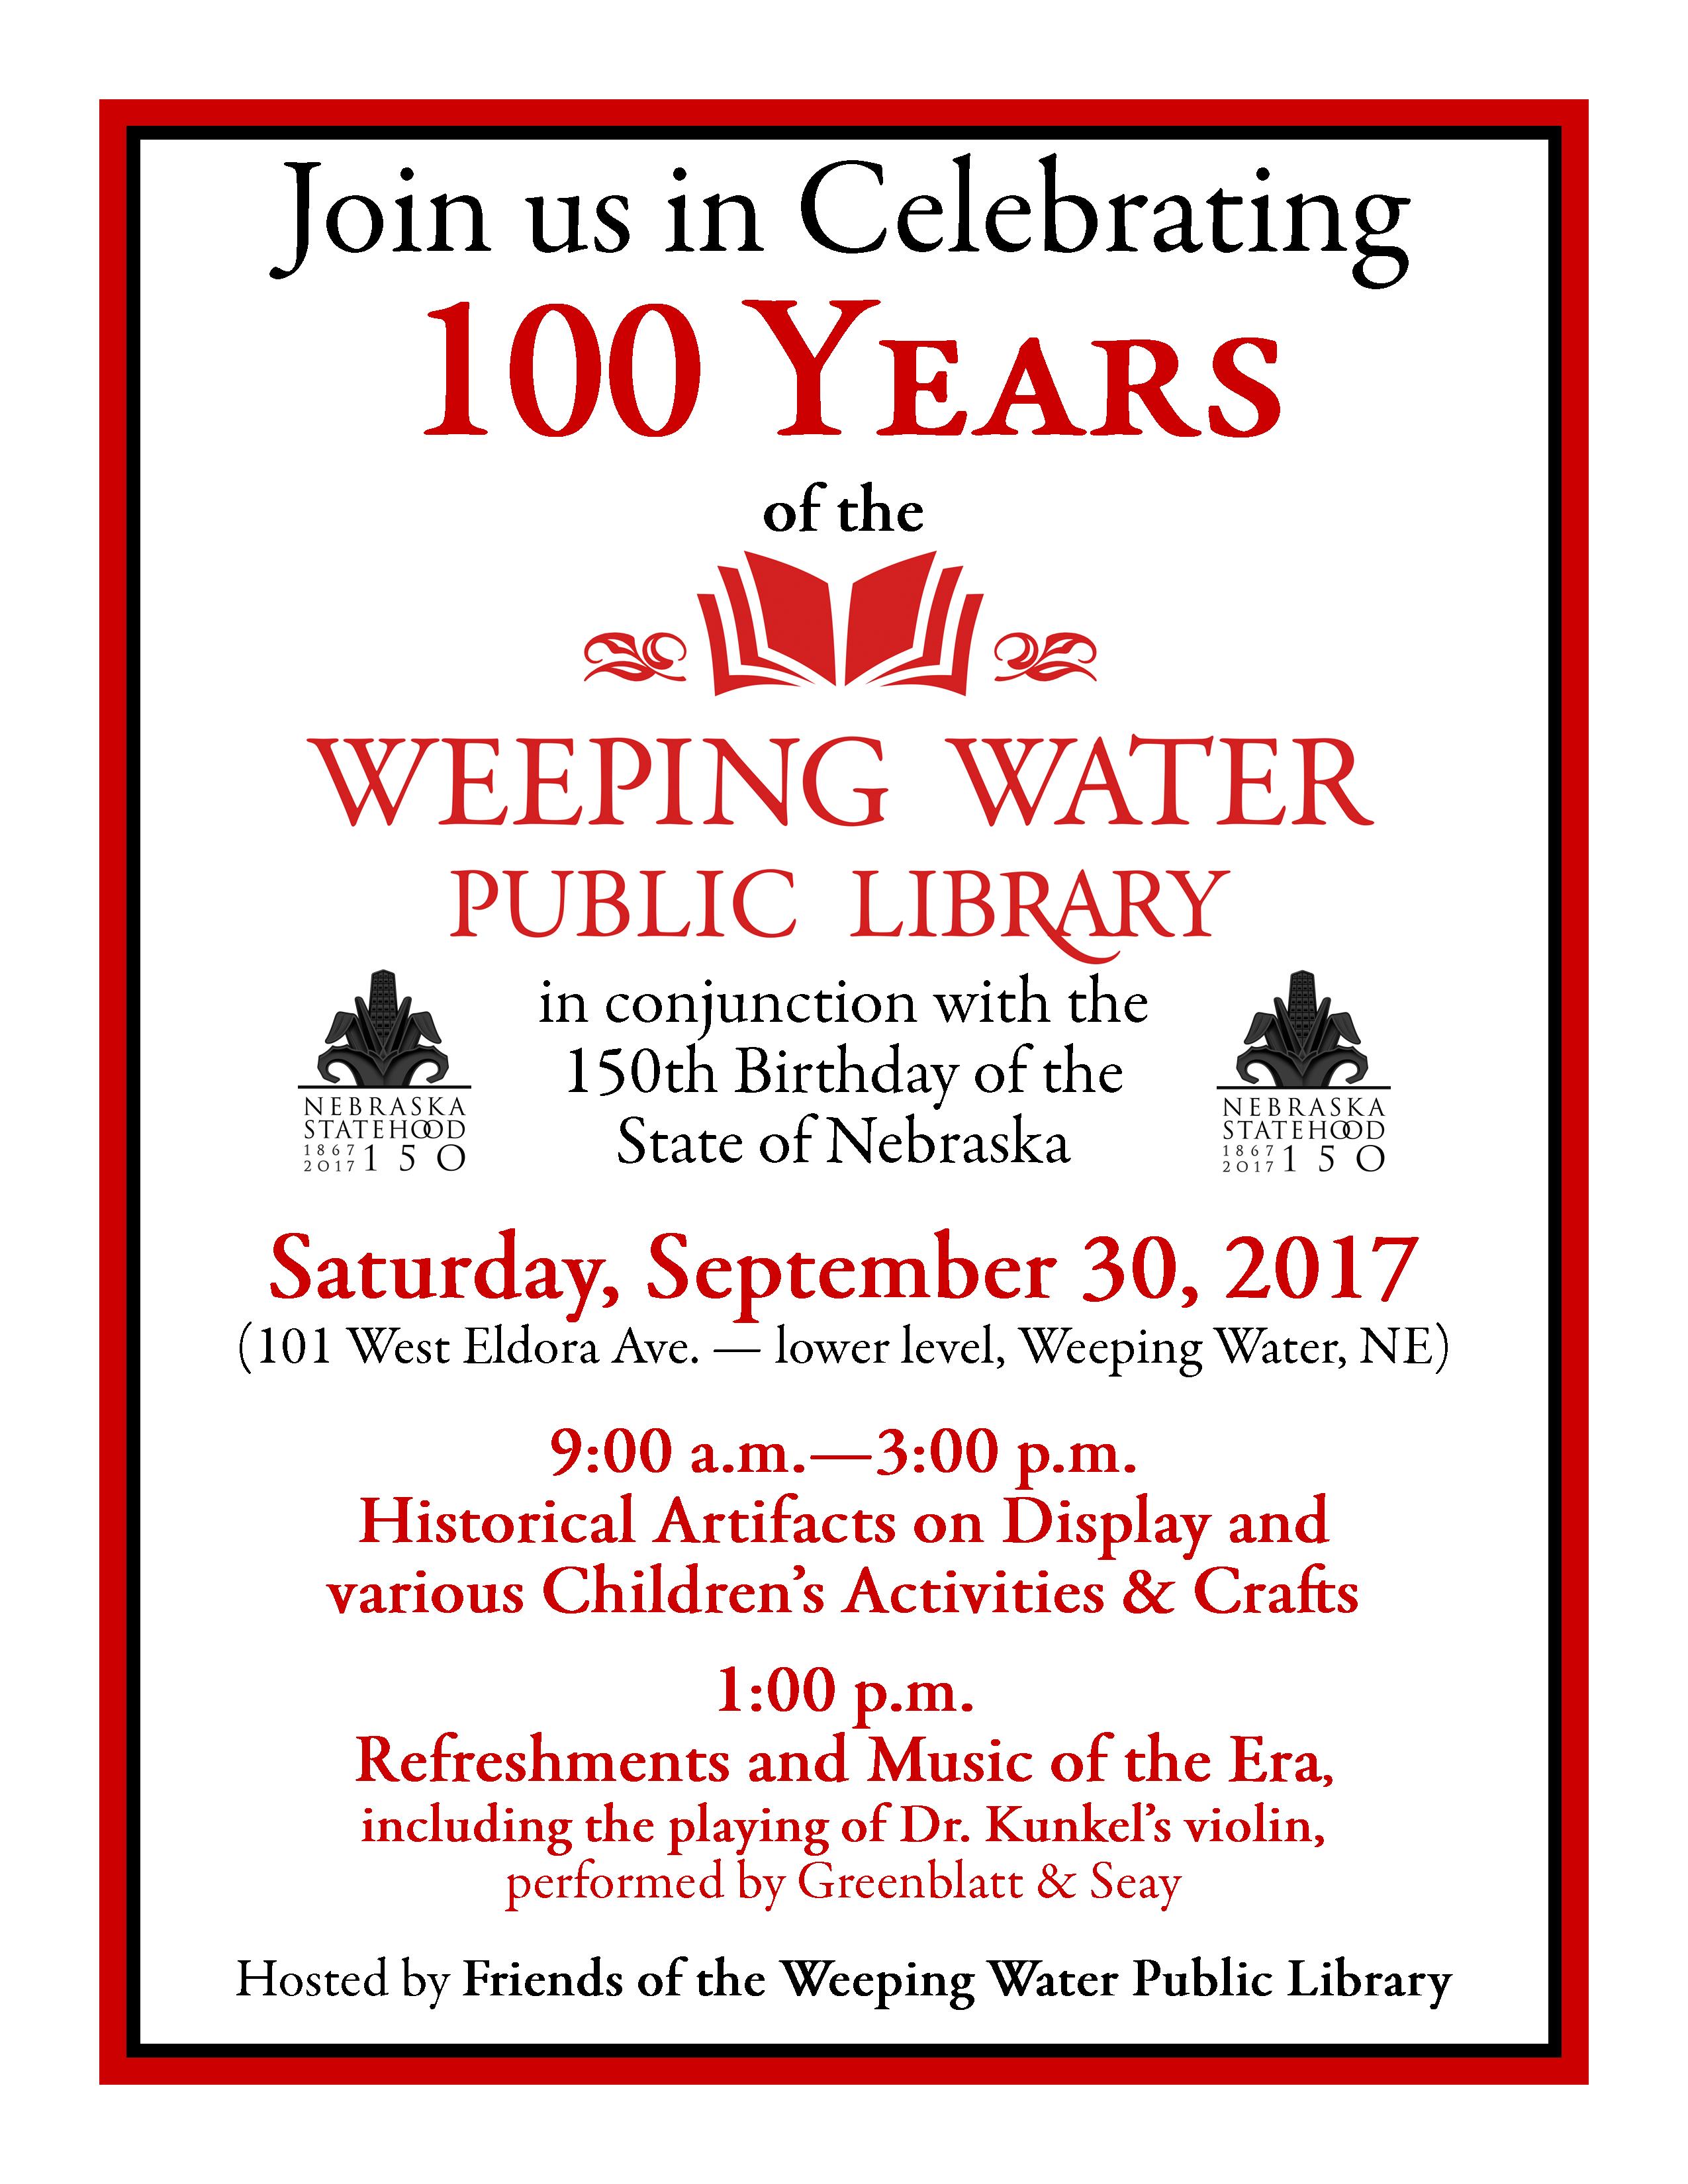 FWWPL Ad Poster for 100th1822